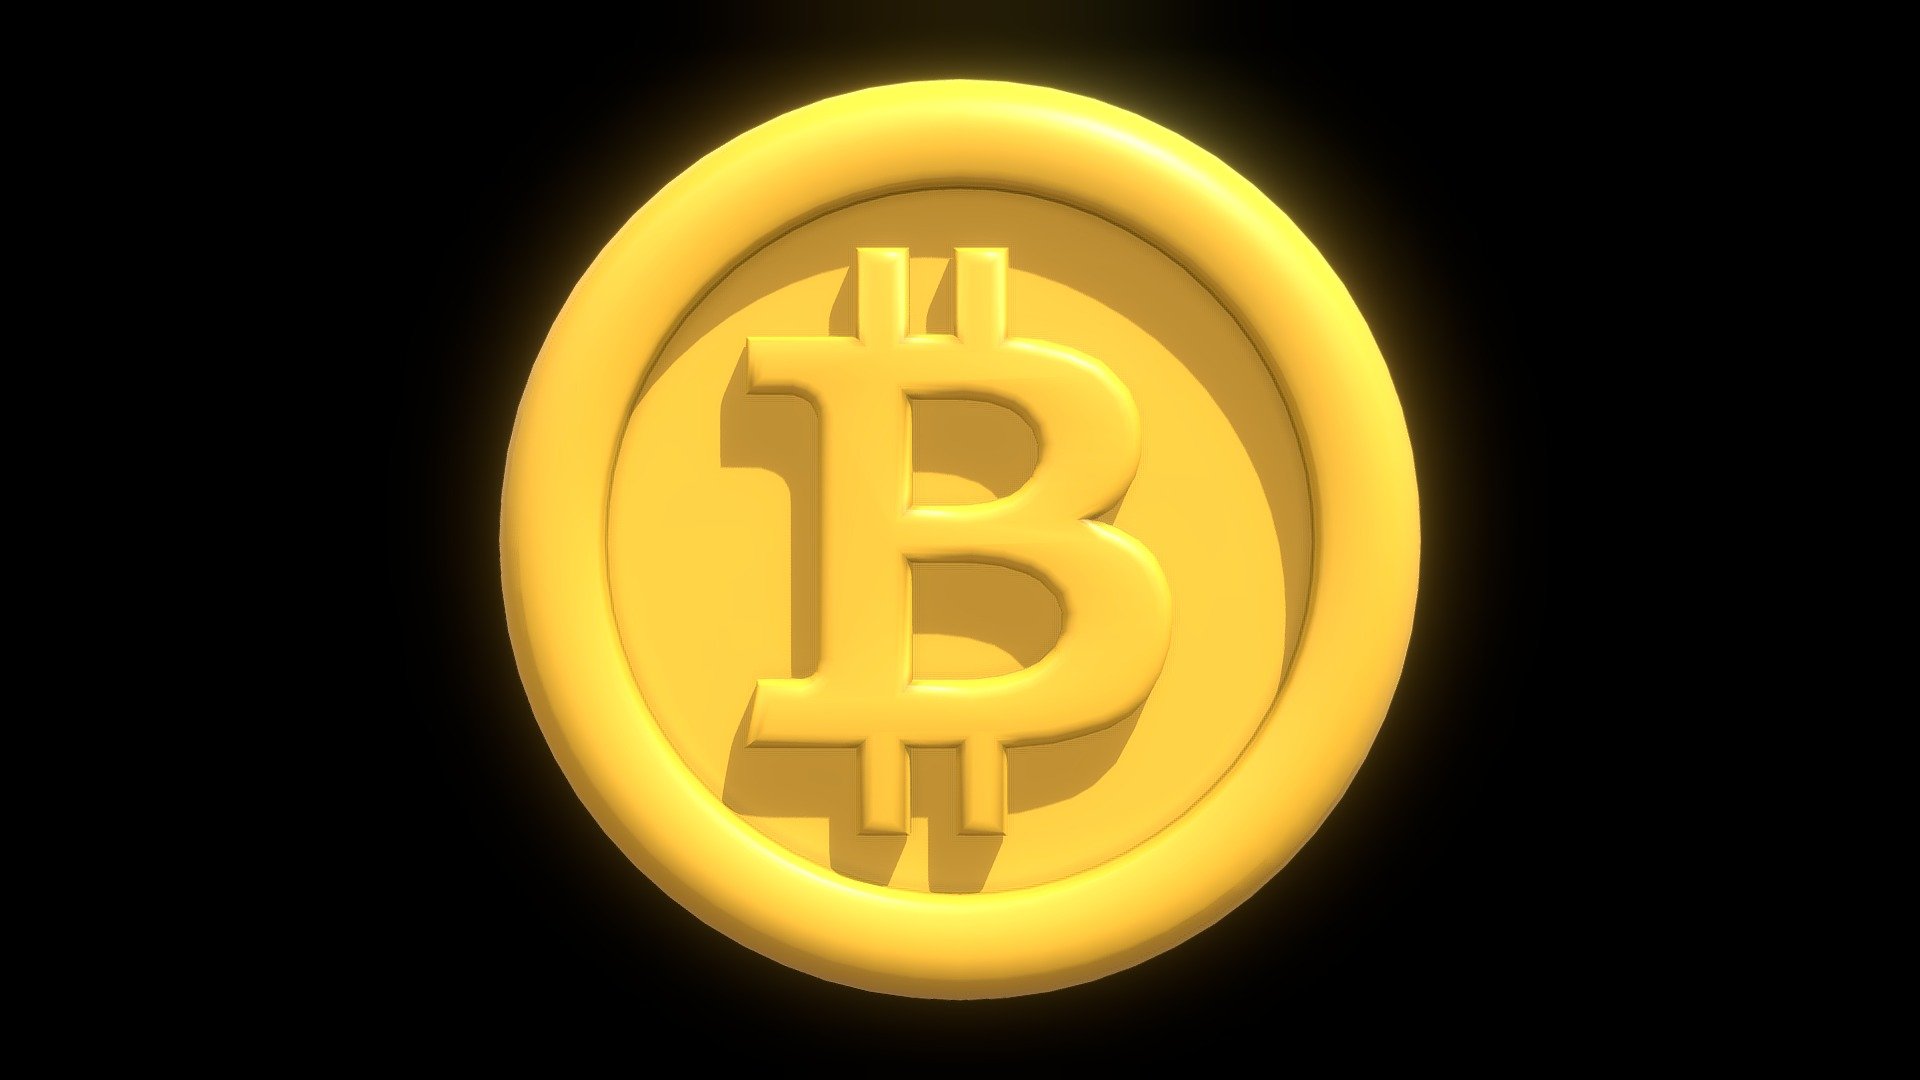 3D Bitcoin or BTC Gold Crypto Coin with cartoon style Made in Blender 3.3.1

This model does include a TEXTURE, DIFFUSE, METALLIC, AND ROUGHNESS MAP, but if you want to change the color you can change it in the blend file, just use the principled bsdf and play with the Roughness, Metallic, and Base Color parameter 3d model